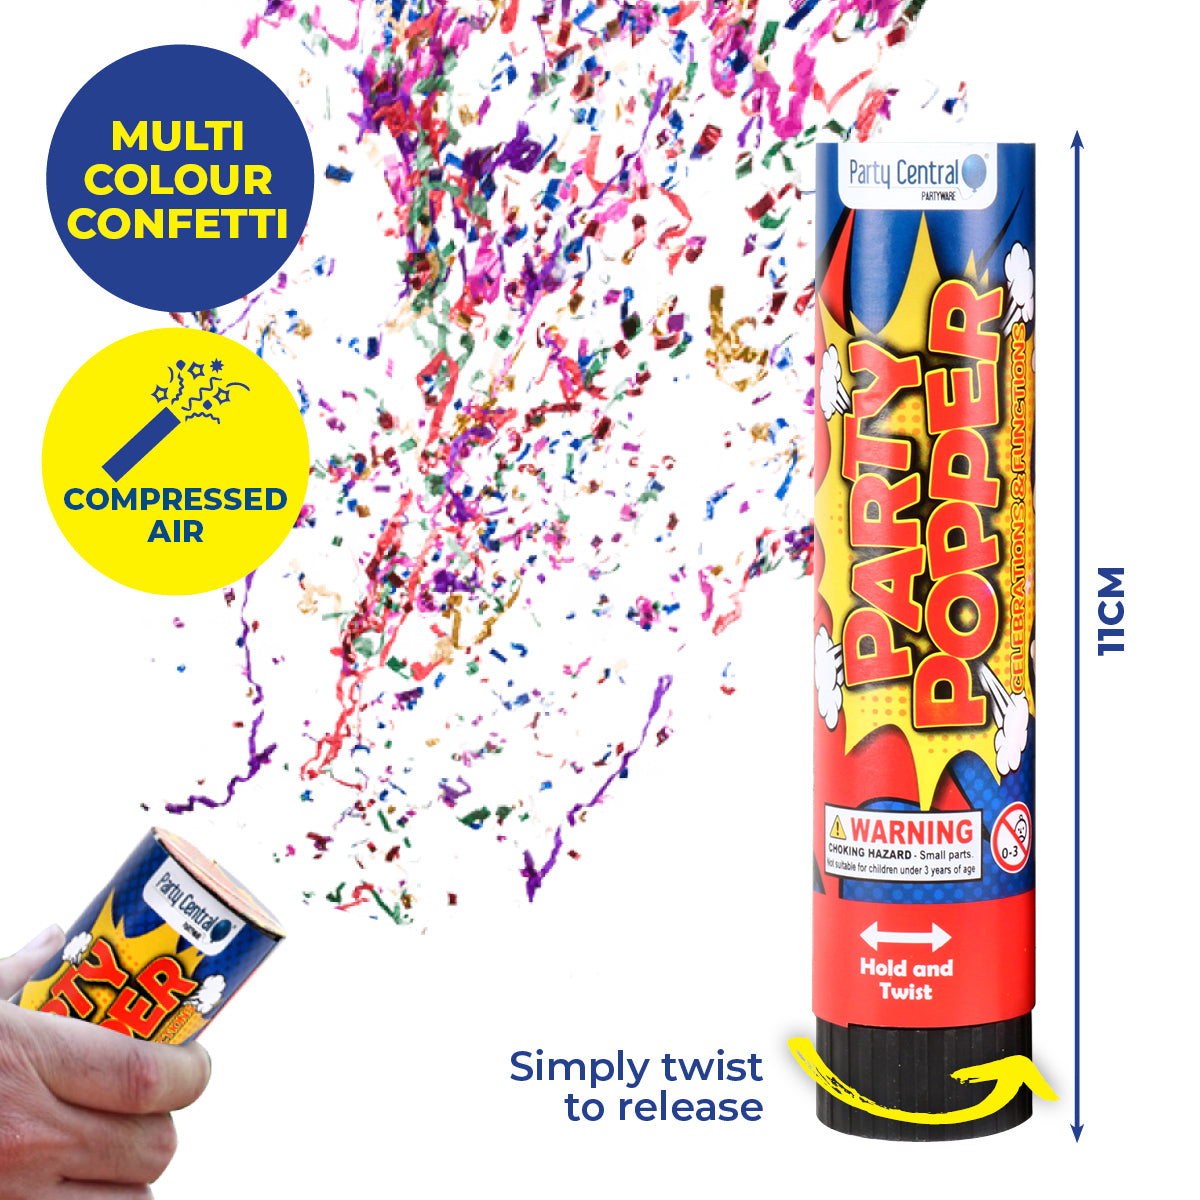 11cm confetti filled party popper blowing its load.